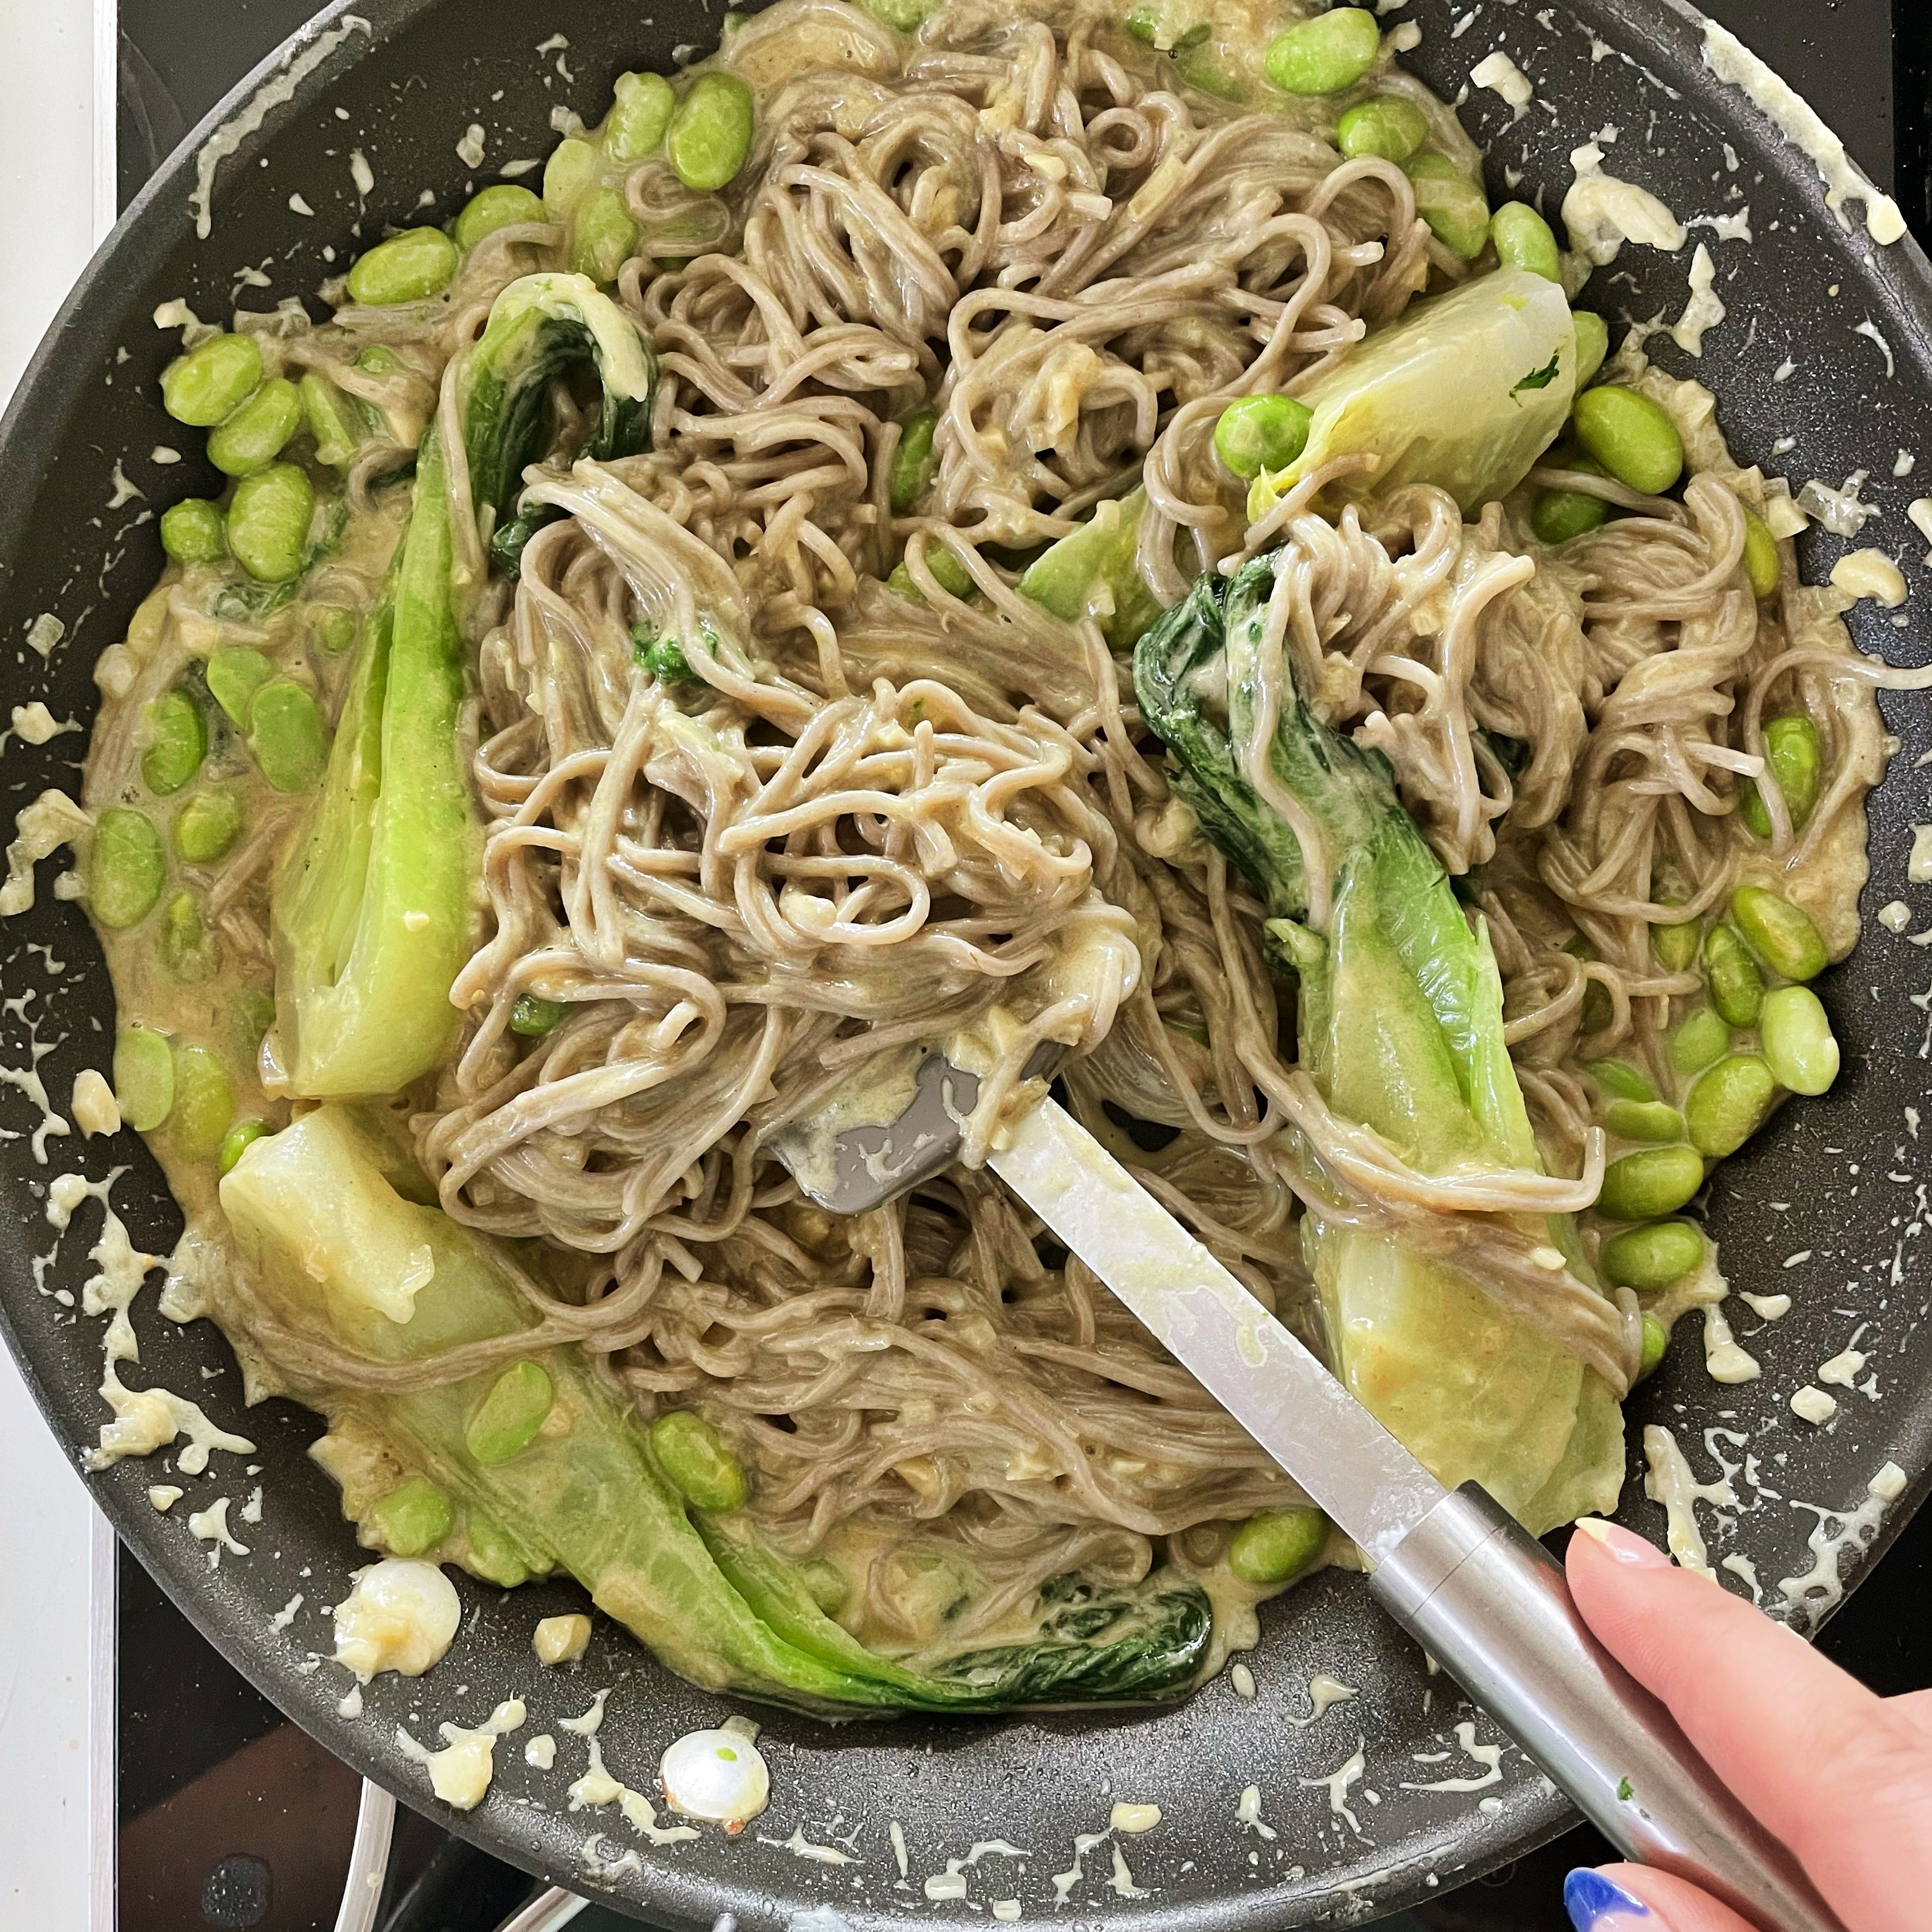 Heat coconut oil in a frying pan. Add the garlic and shallots and sauté. Then add the curry paste, turmeric and salt to sauté as well. Now add the edamame beans and bok choy and fry until the bok choy begins to fall apart. Add the coconut milk and simmer for approx. 5 min. Add the soba noodles and thoroughly mix everything together. Season with pepper and salt and serve immediately. Serve with lime, sesame seeds and chili oil.